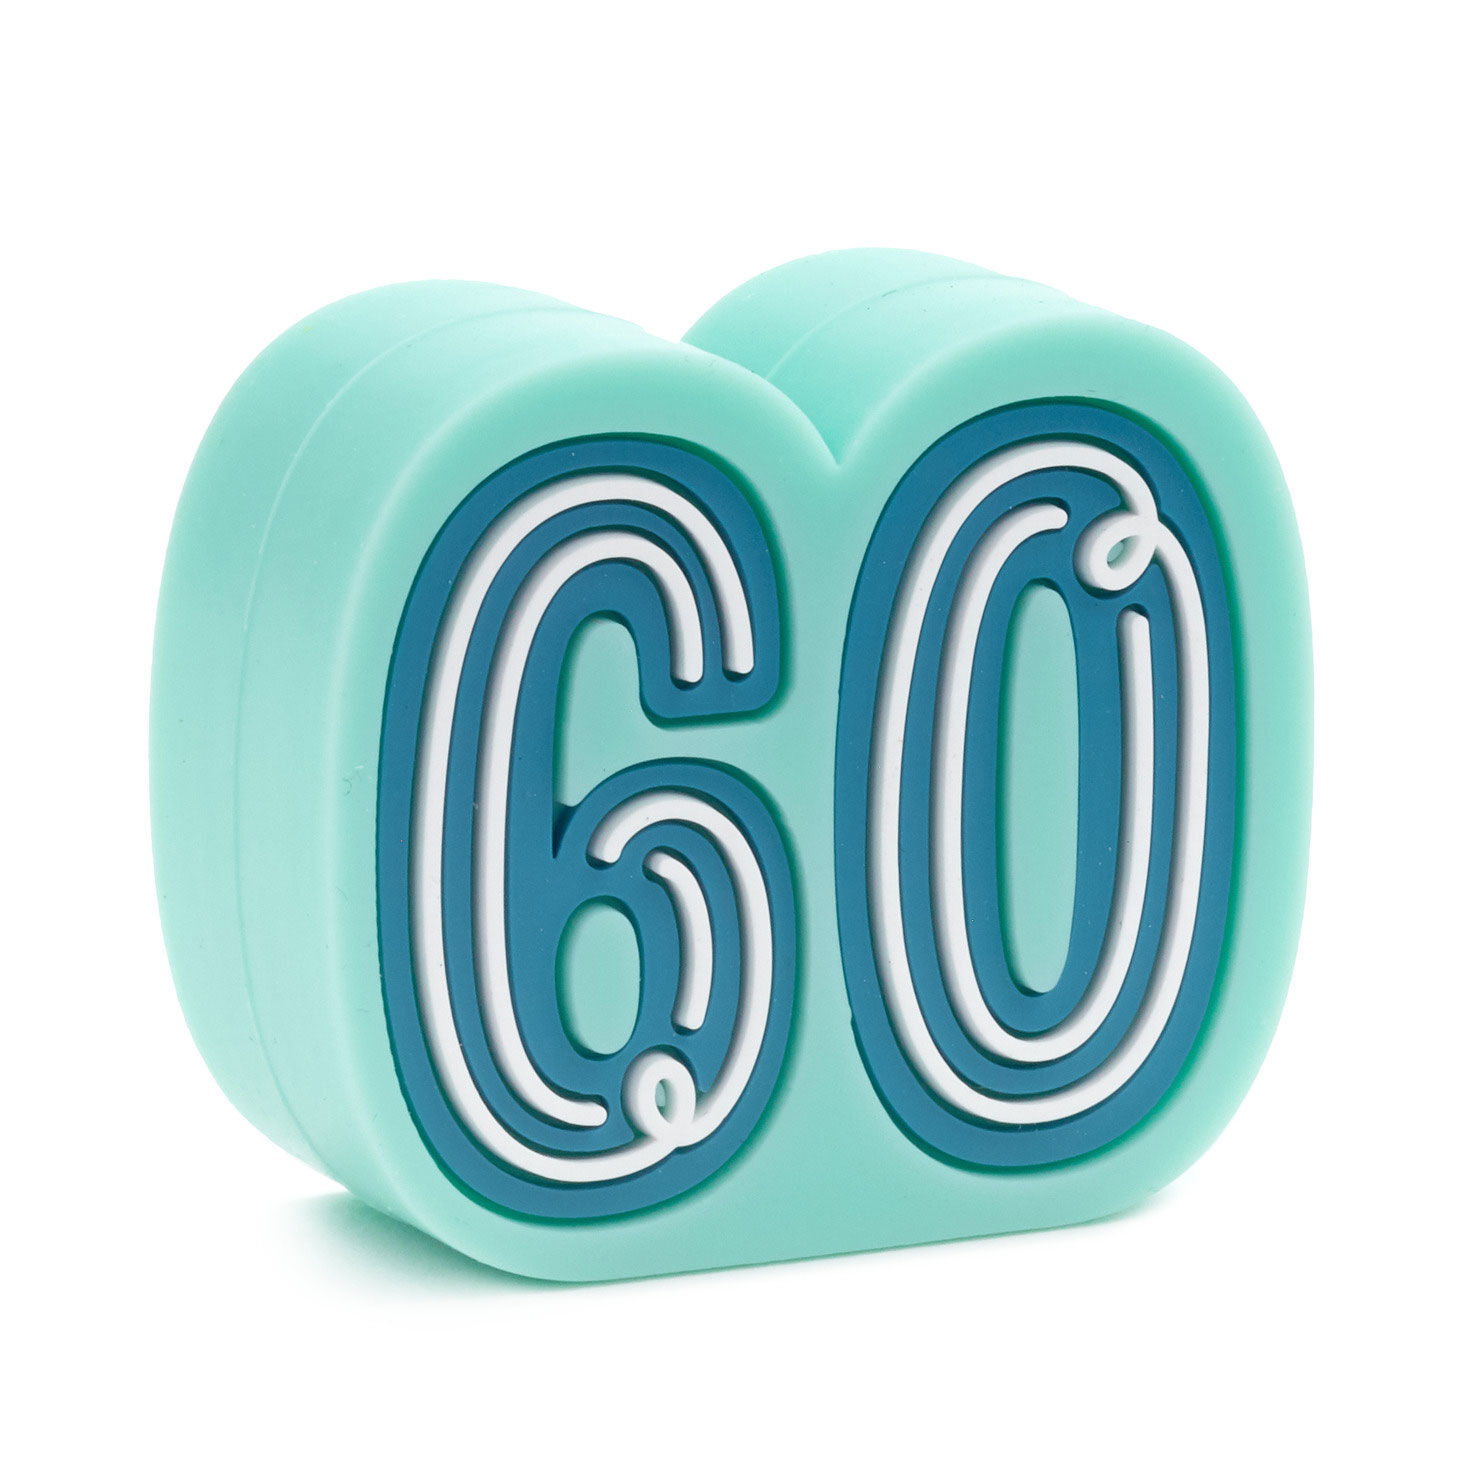 Charmers 60th Birthday Silicone Charm for only USD 8.99 | Hallmark